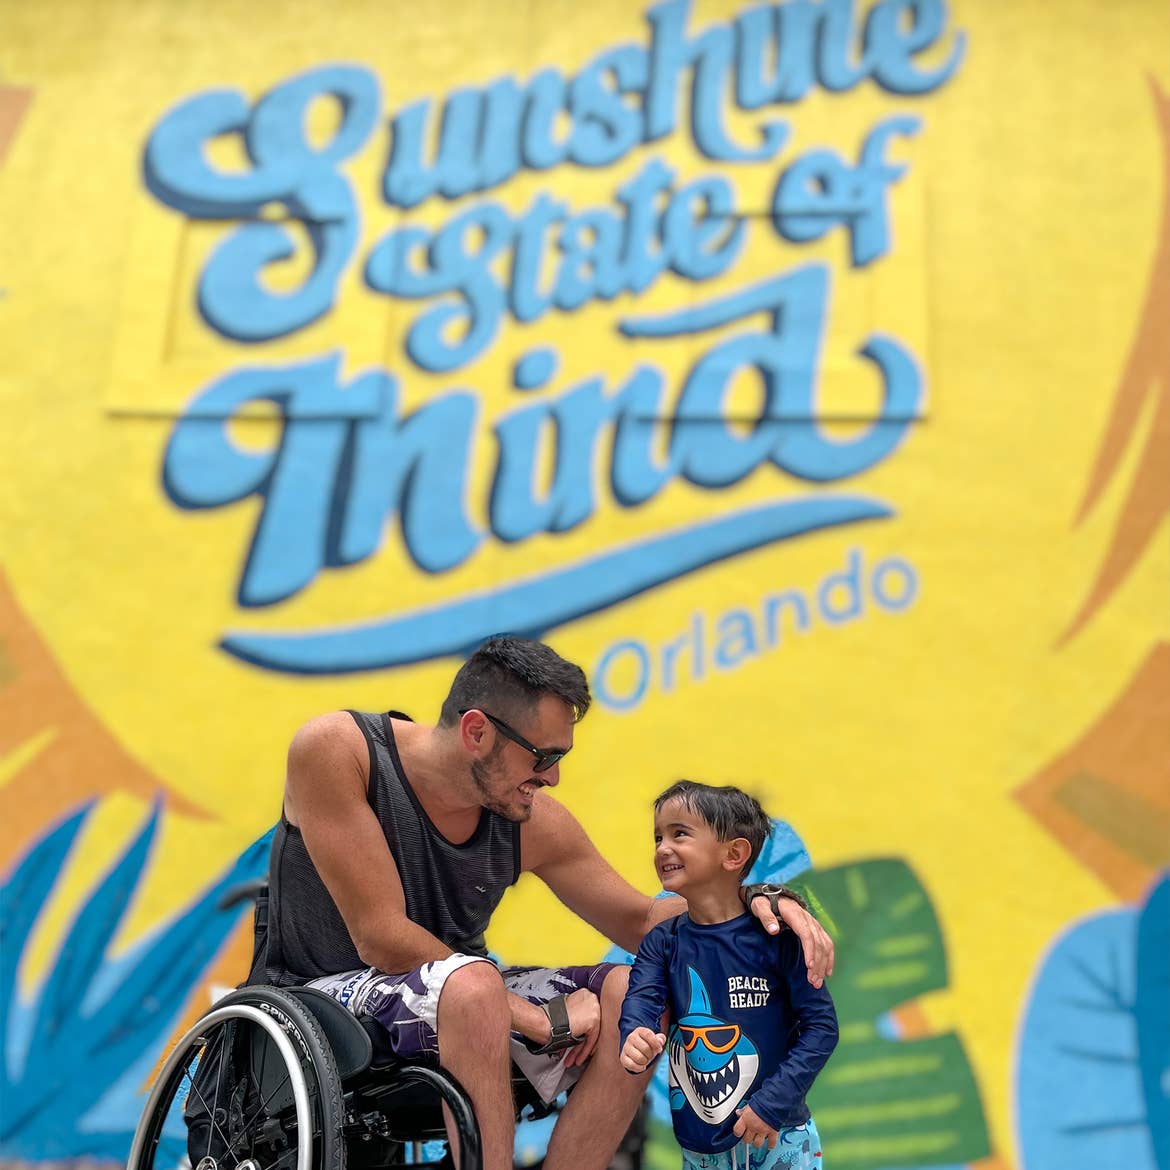 A man in a wheelchair is seated next to a toddler boy in front of a wall mural.